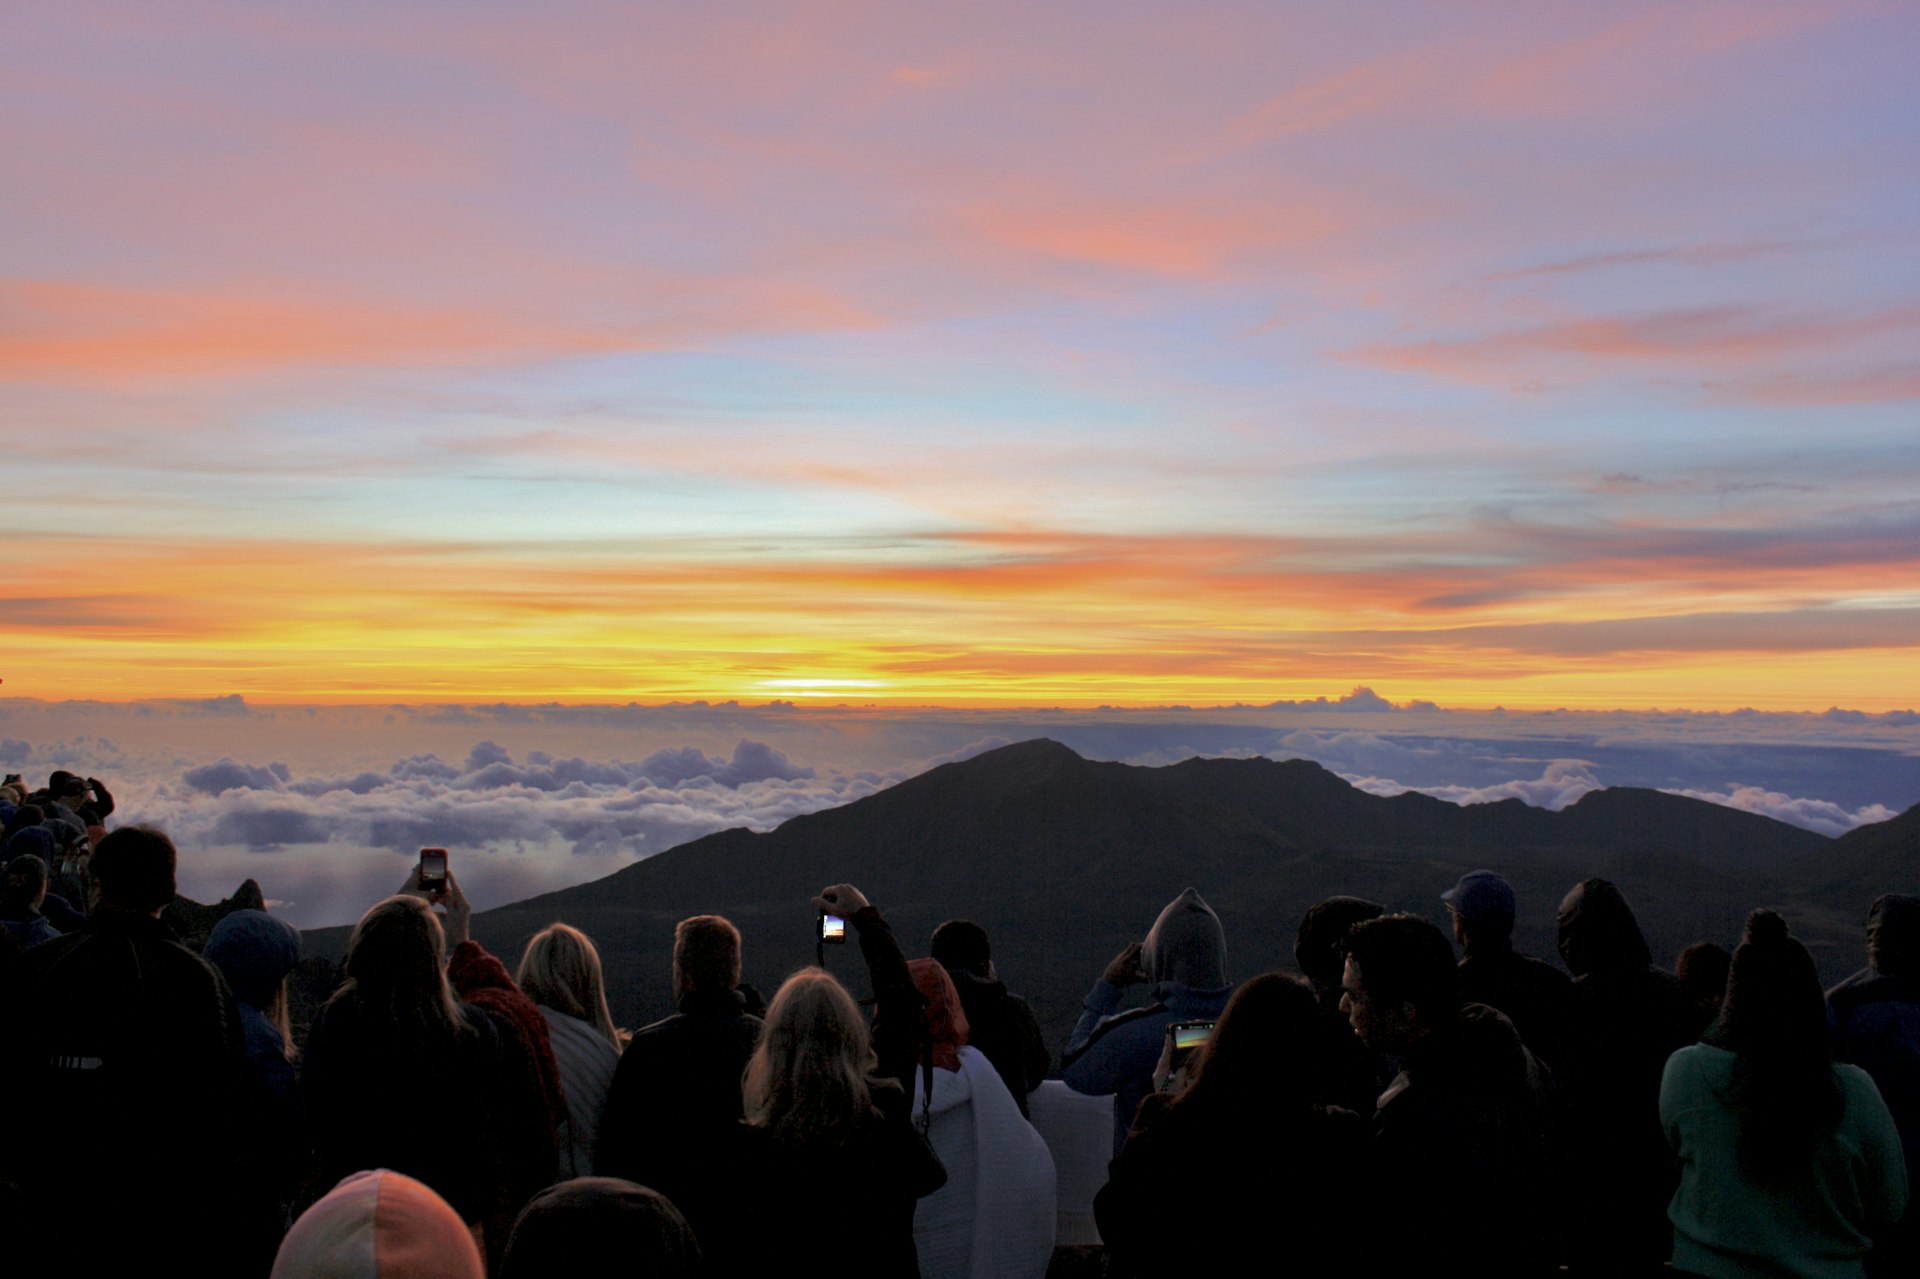 A crowd of people standing on the Haleakalā summit at dawn, silhouetted against the sunrise